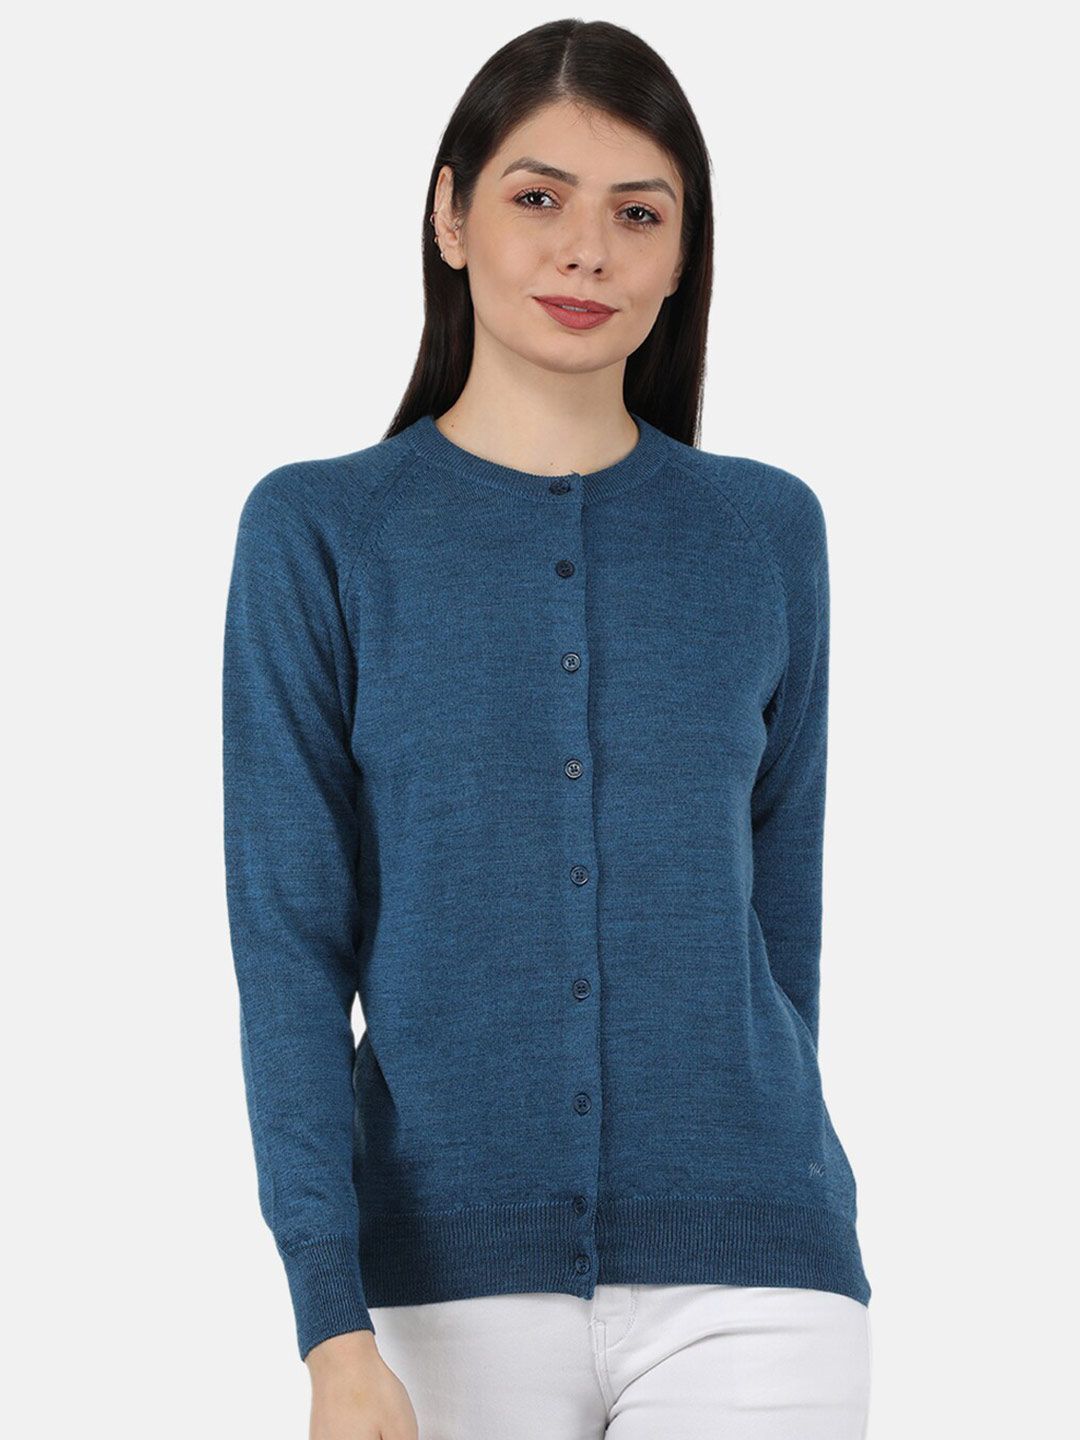 Monte Carlo Women Blue Solid Cardigan with Button Closure Price in India